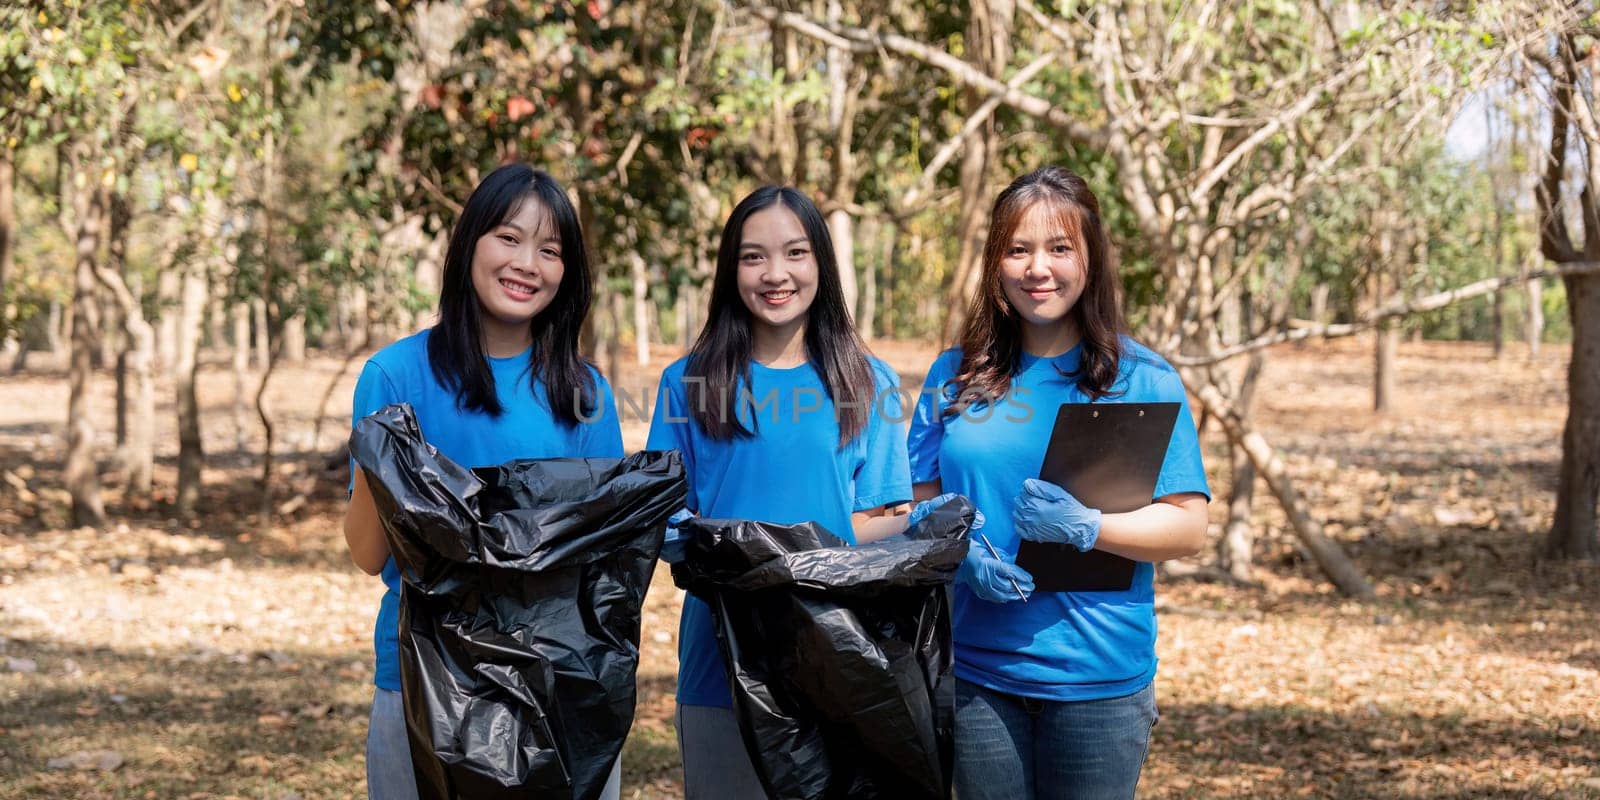 Volunteer collecting plastic trash in the forest. The concept of environmental conservation. Global environmental pollution. Cleaning the forest by nateemee